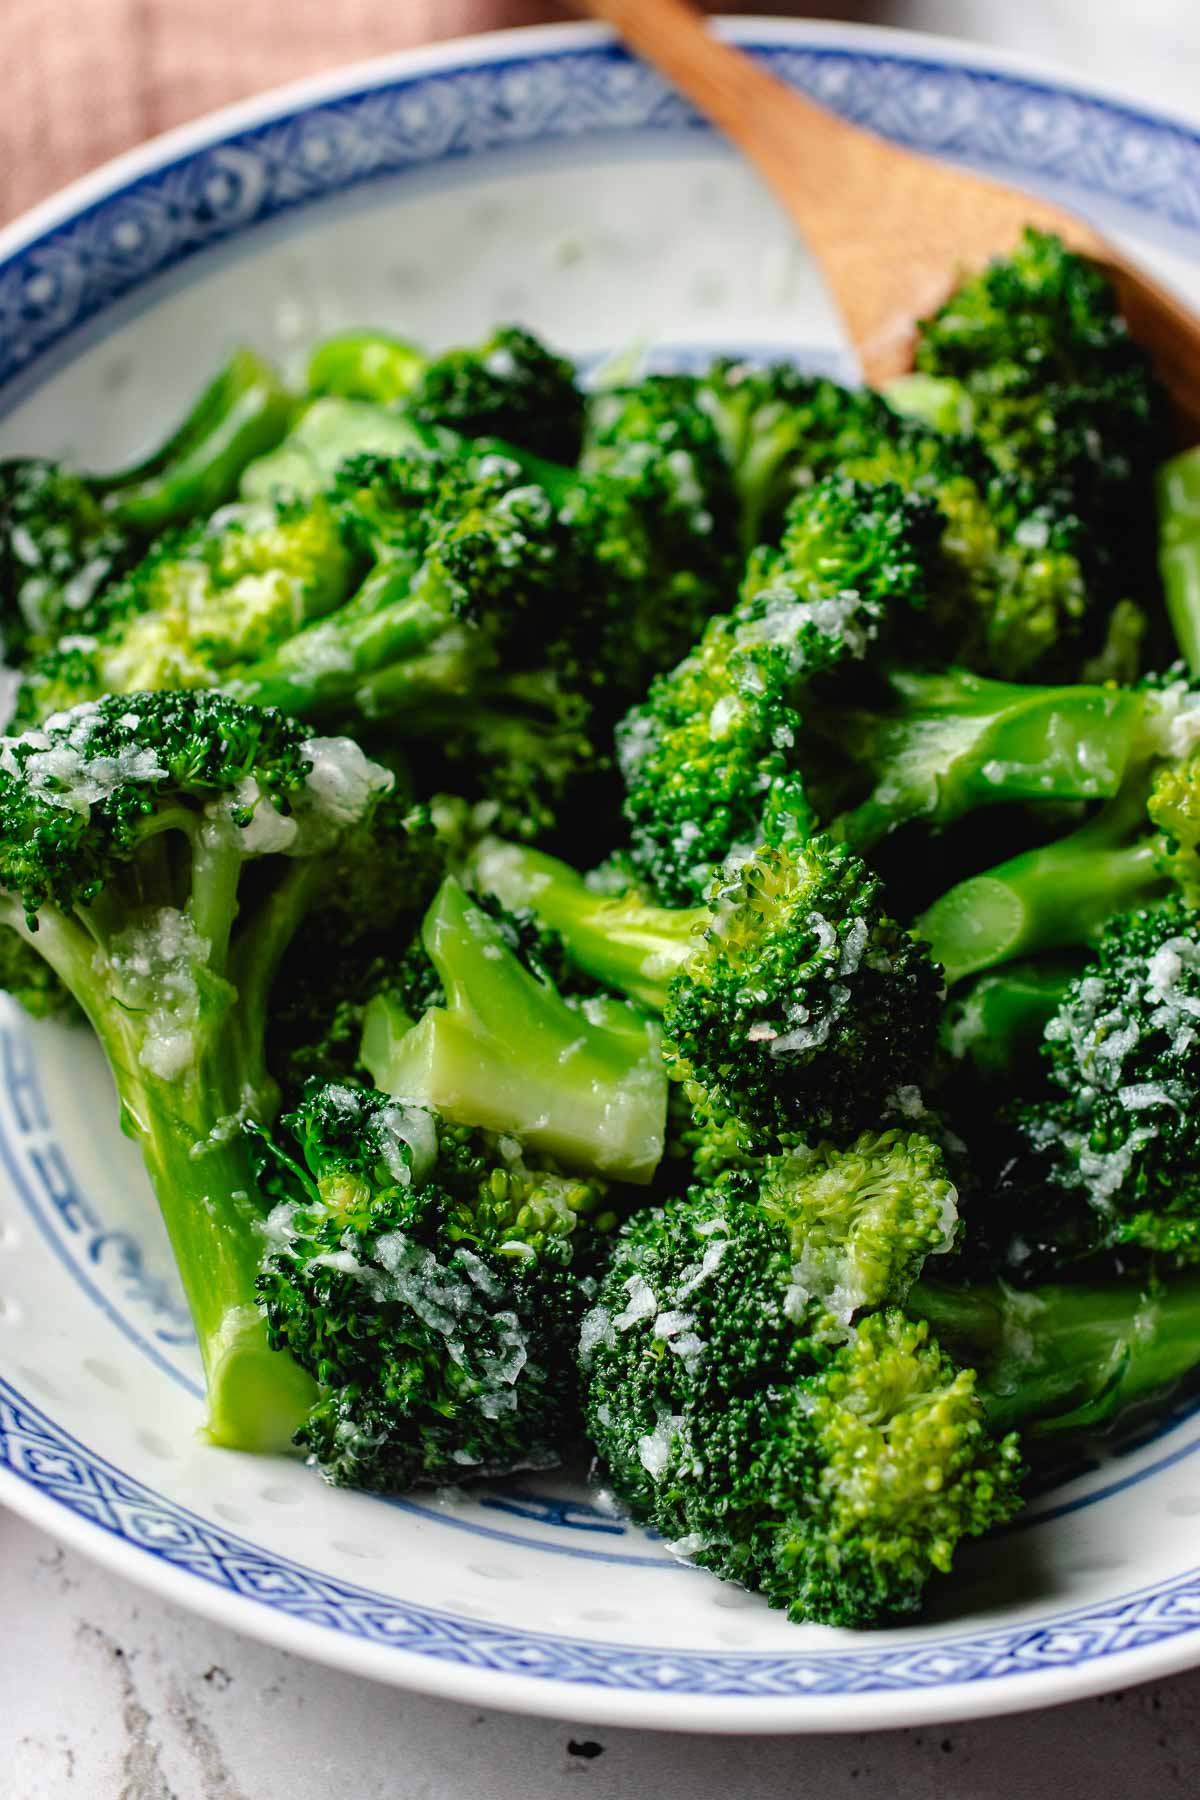 Feature image shows garlic broccoli that is tender and coated with garlic sauce and served in a blue white color plate.